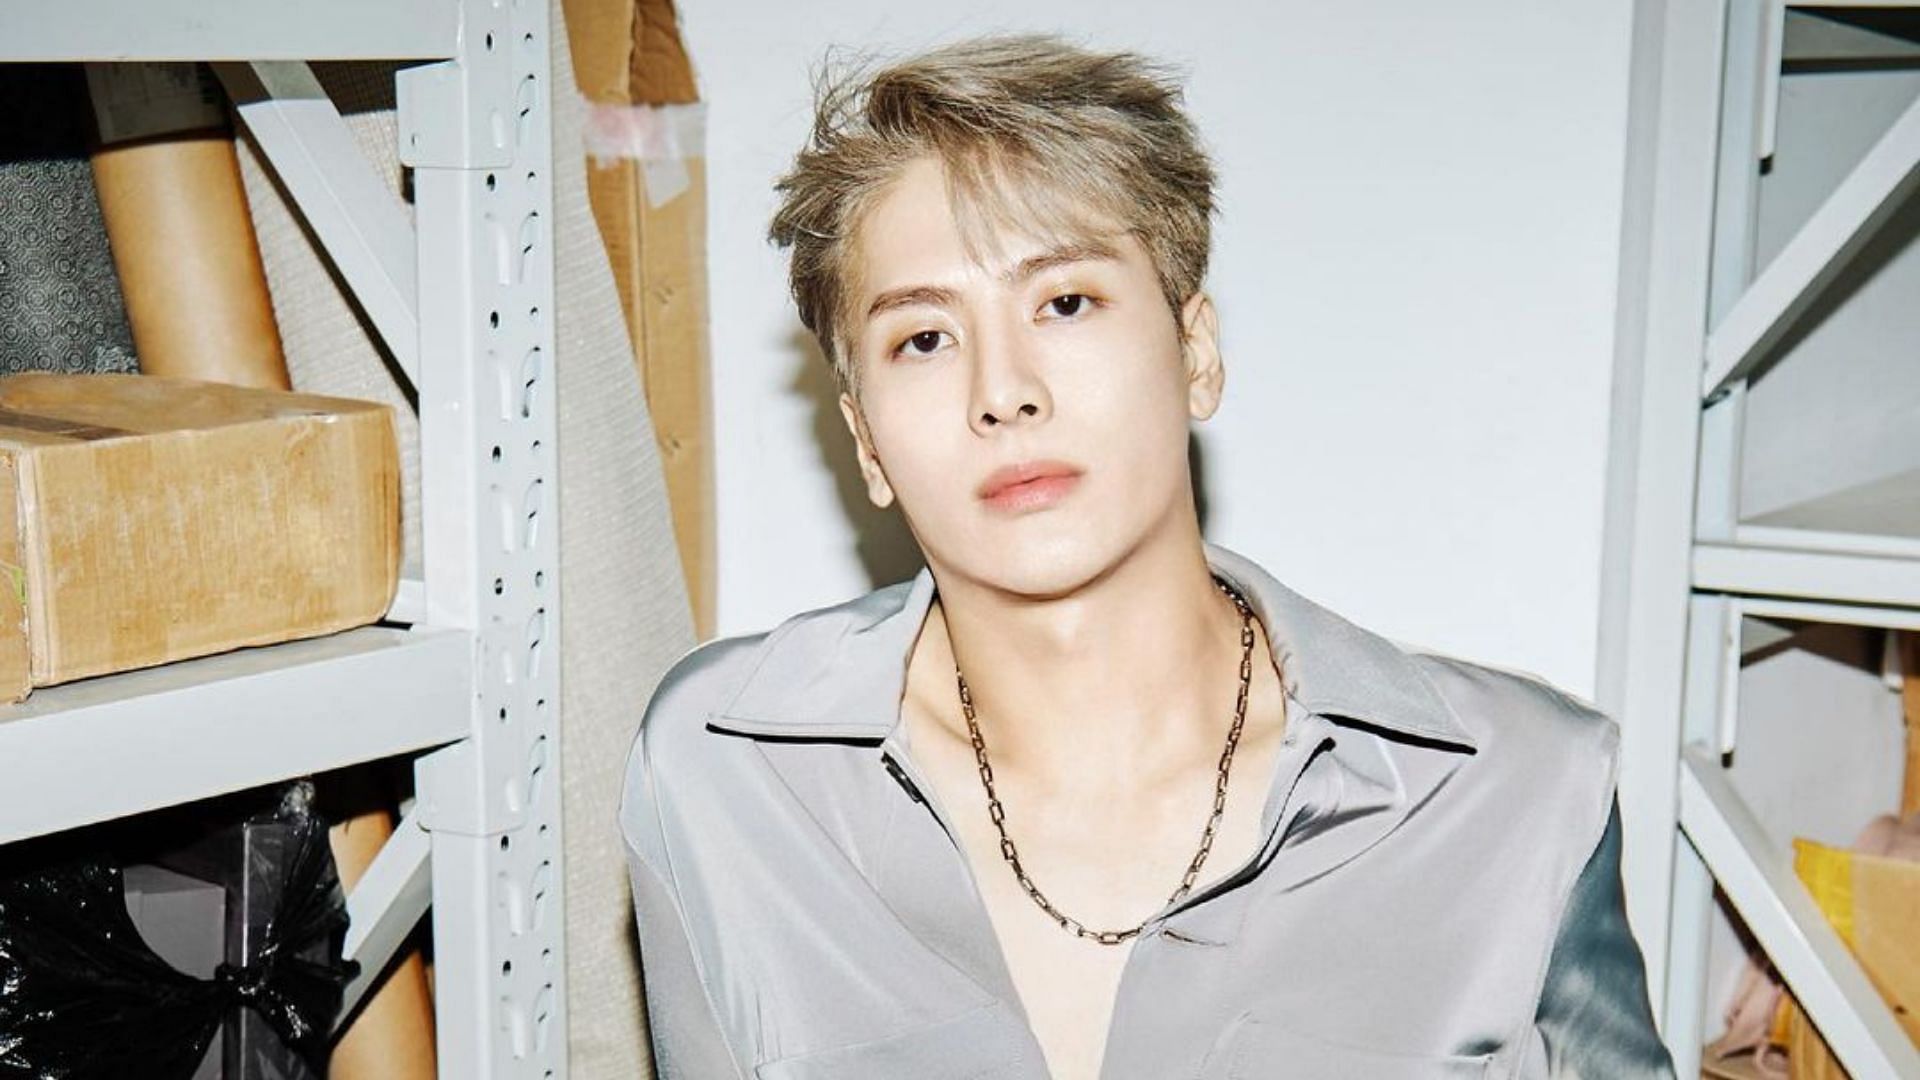 K-pop star Jackson Wang discusses unity, kindness and community